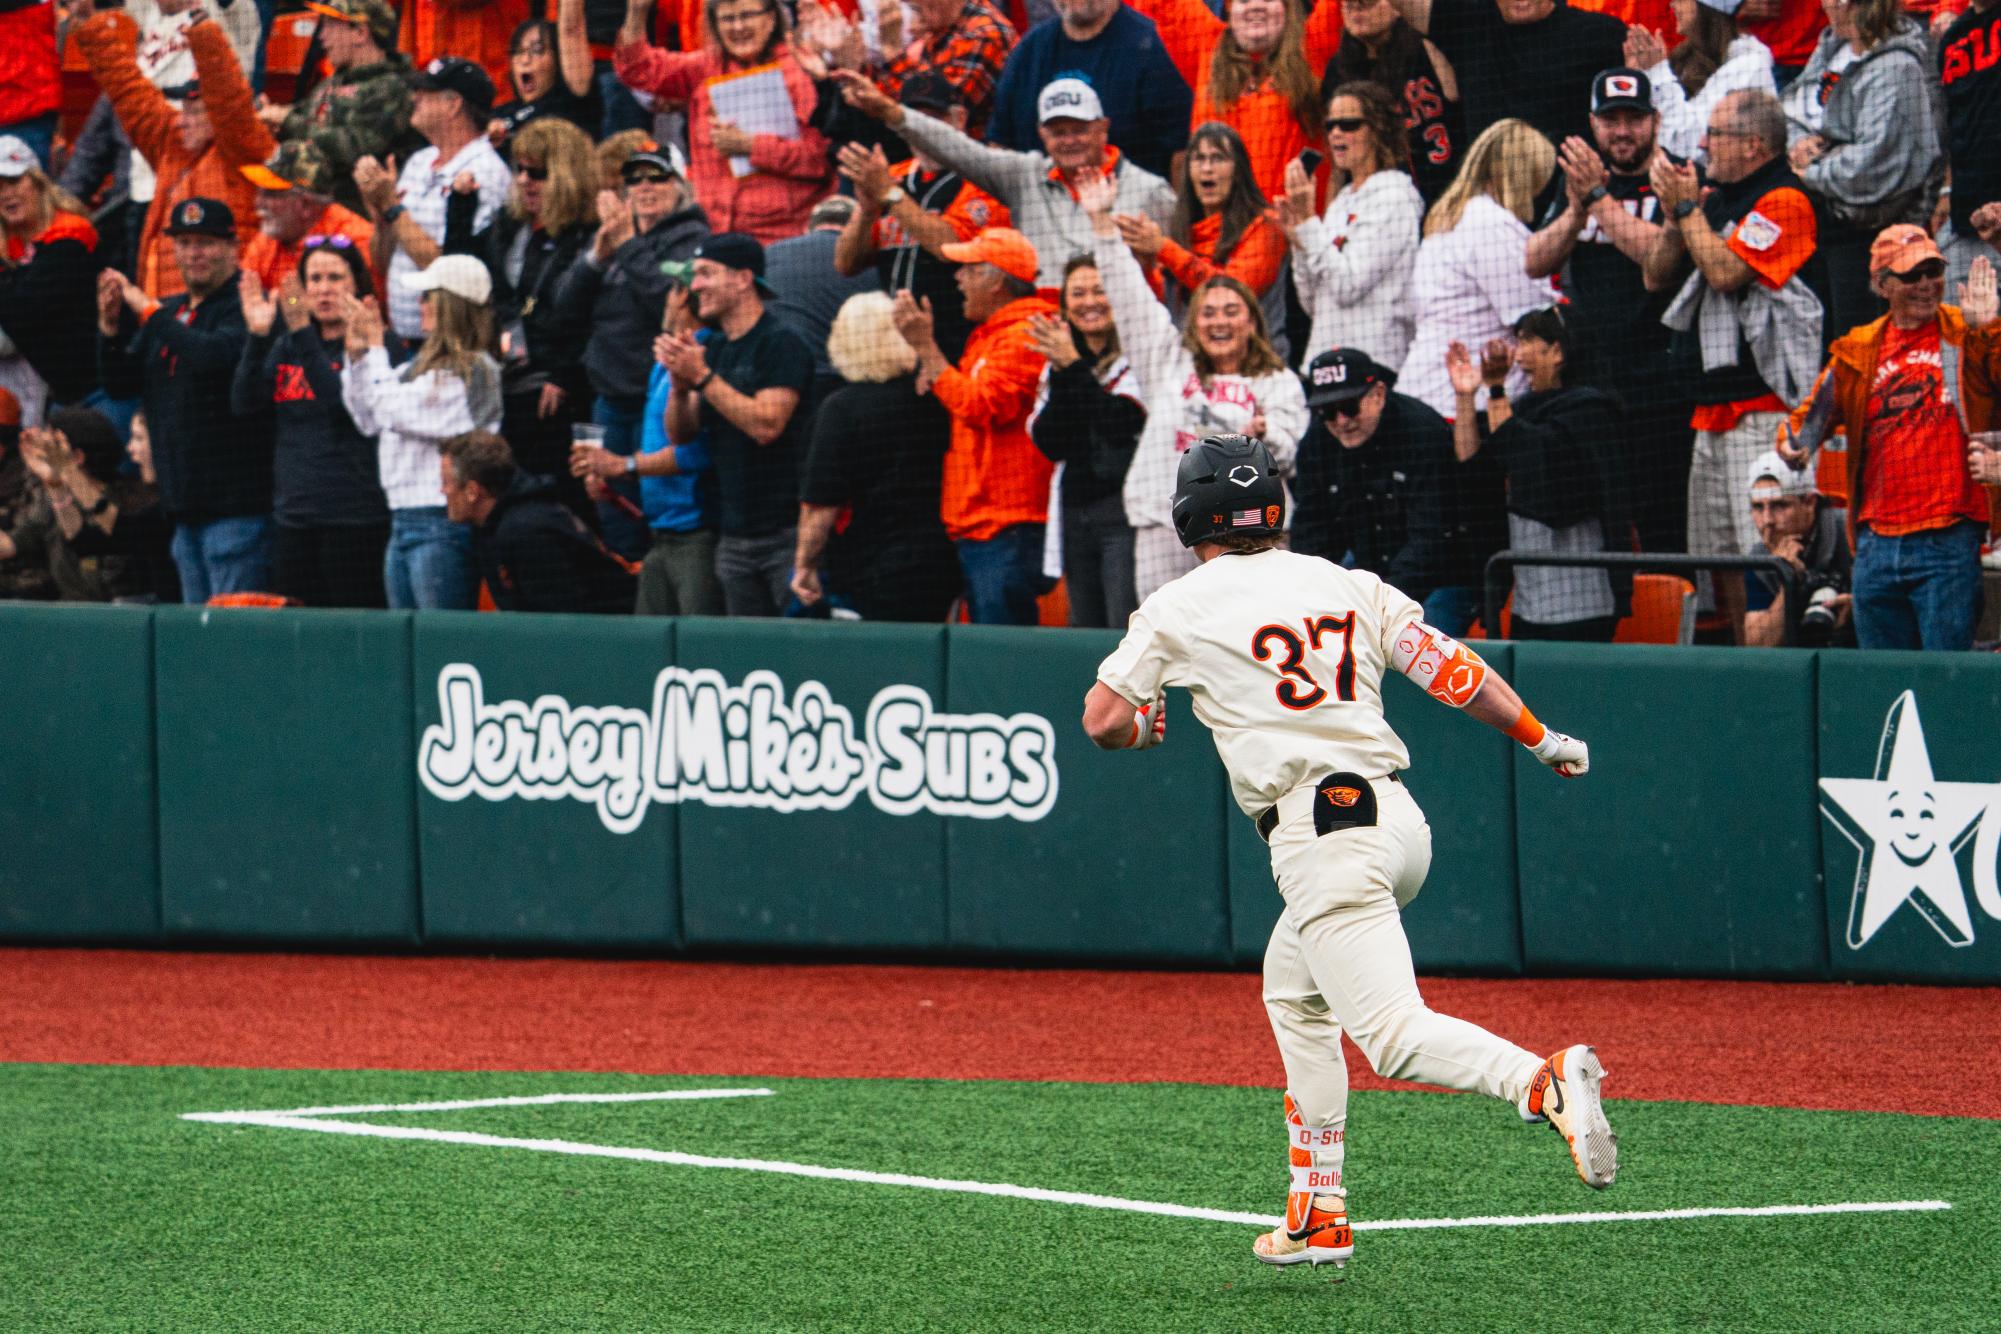 Travis Bazzana celebrates his home run against the UC Irvine Anteaters on Saturday at Goss Stadium in Corvallis. This was Bazzana’s 28th home run of the year.